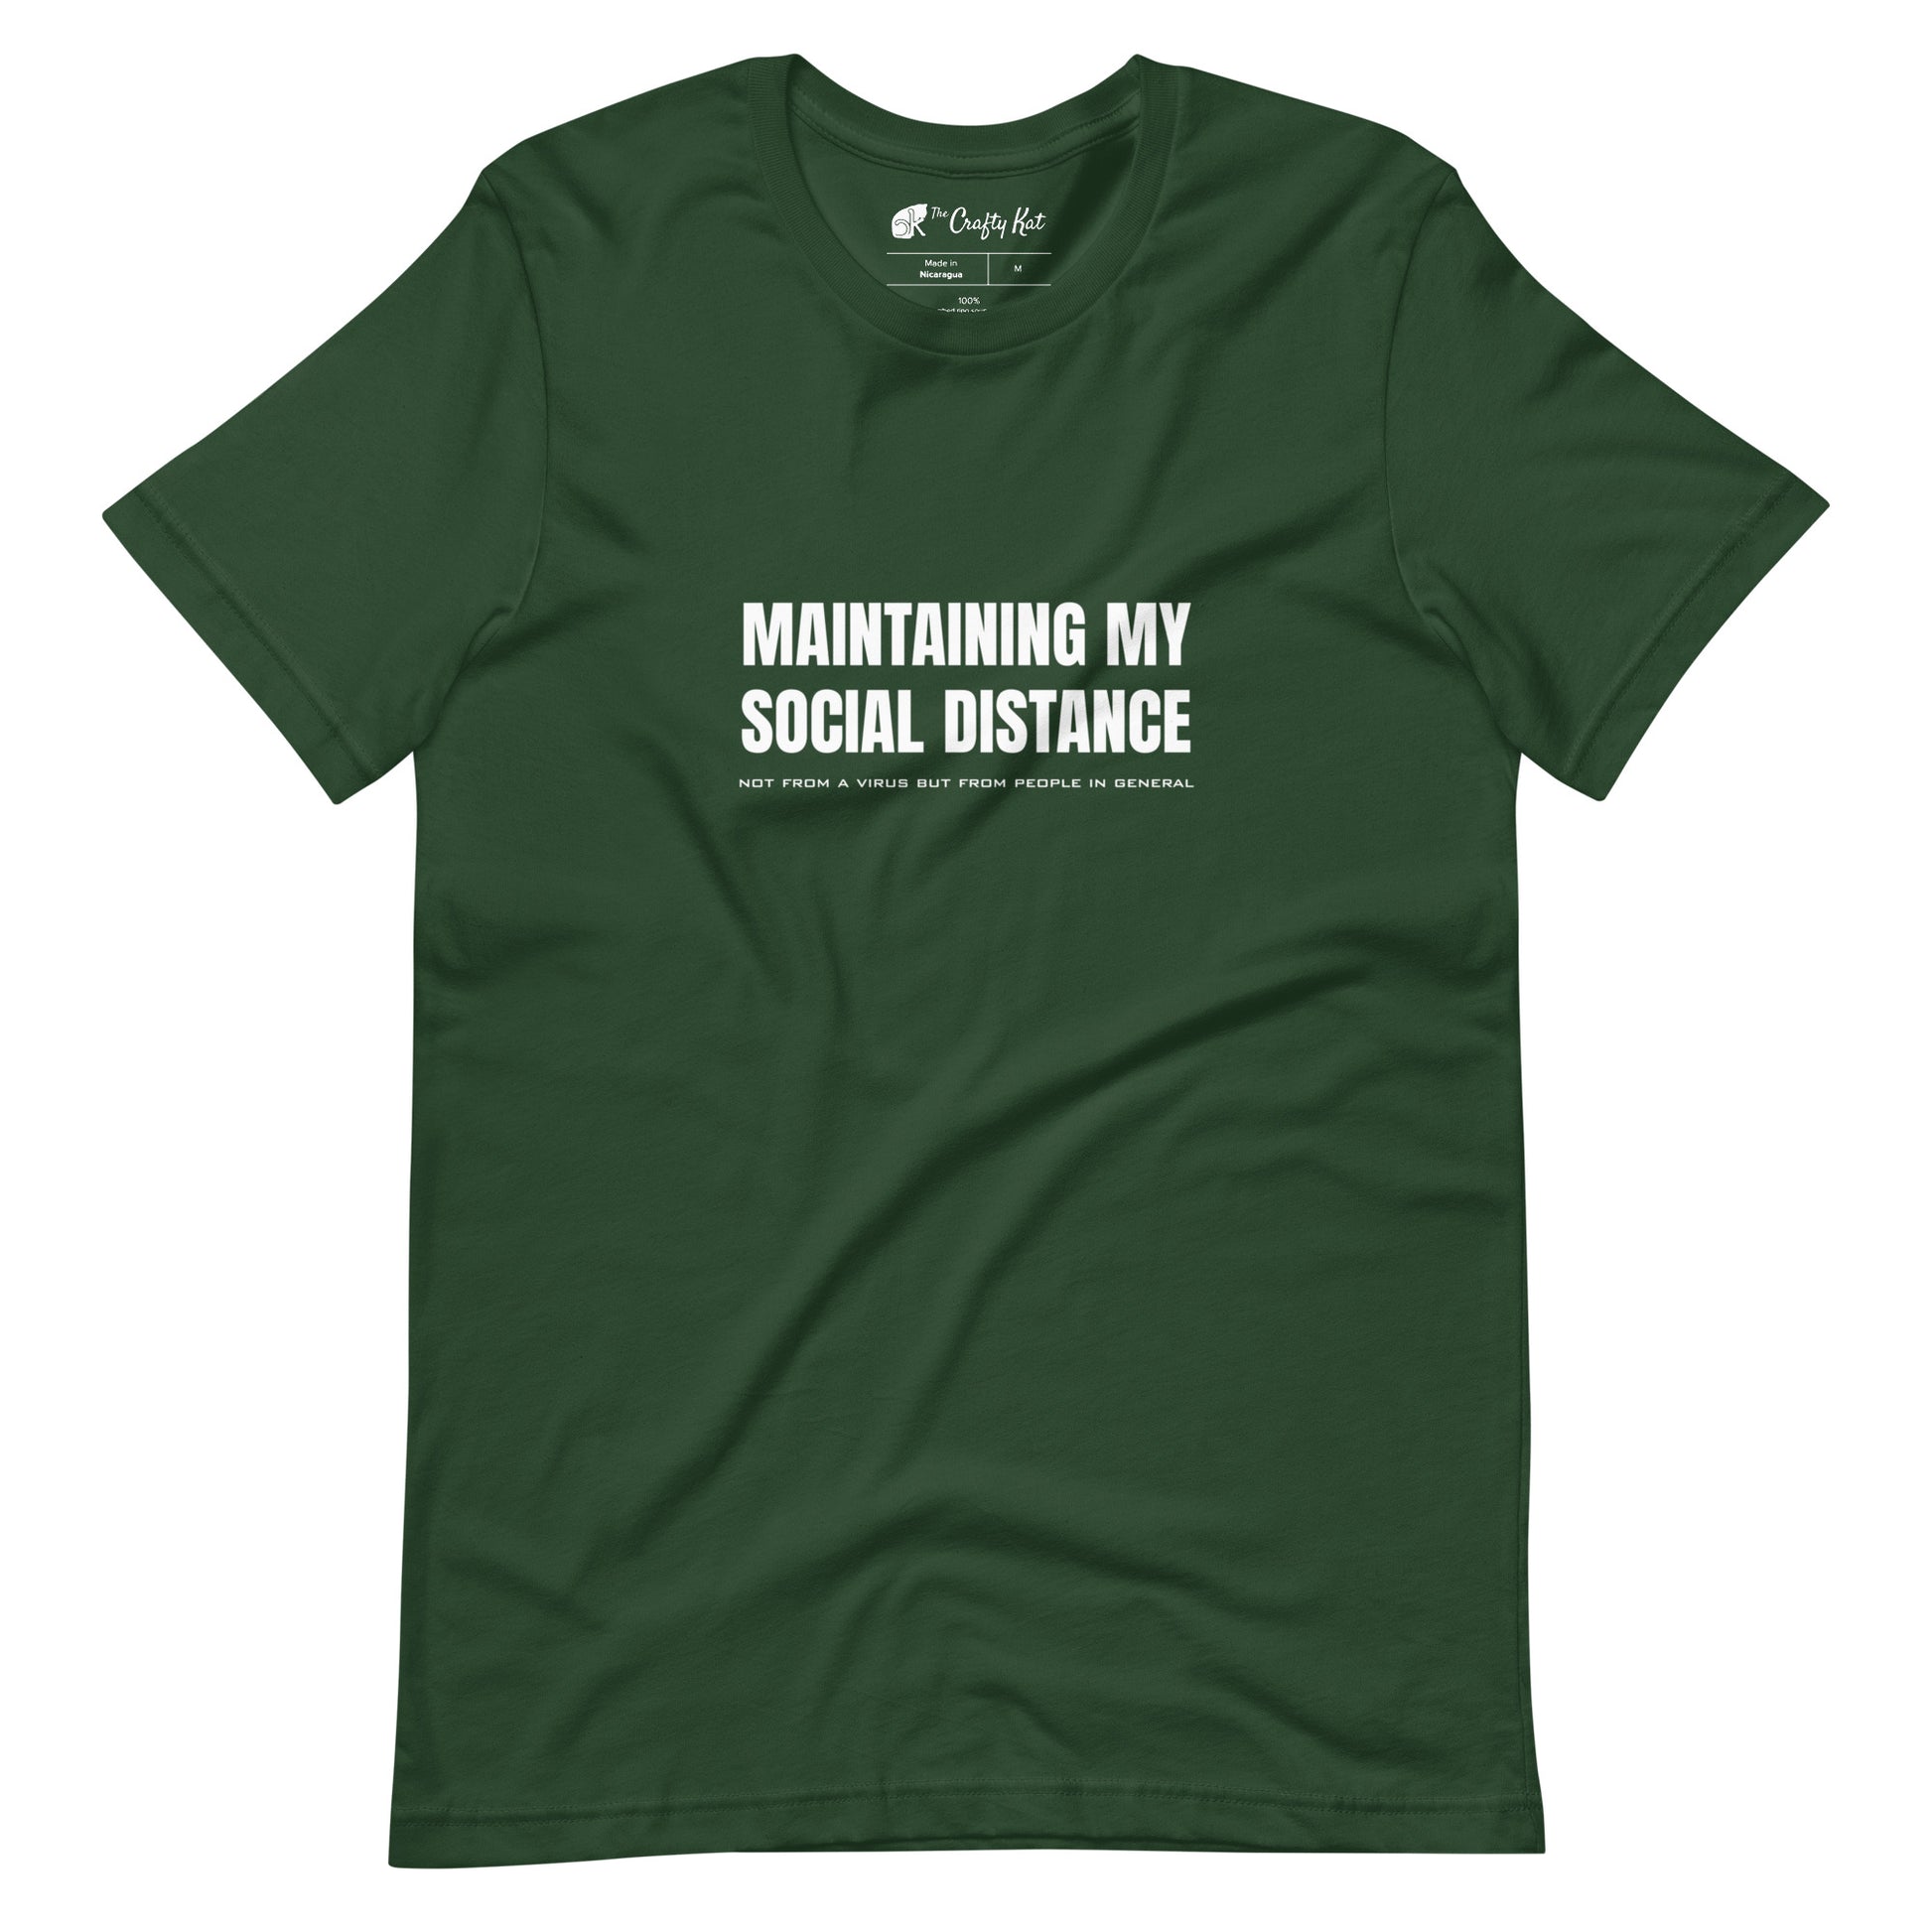 Forest green t-shirt with white graphic: "MAINTAINING MY SOCIAL DISTANCE not from a virus but from people in general"